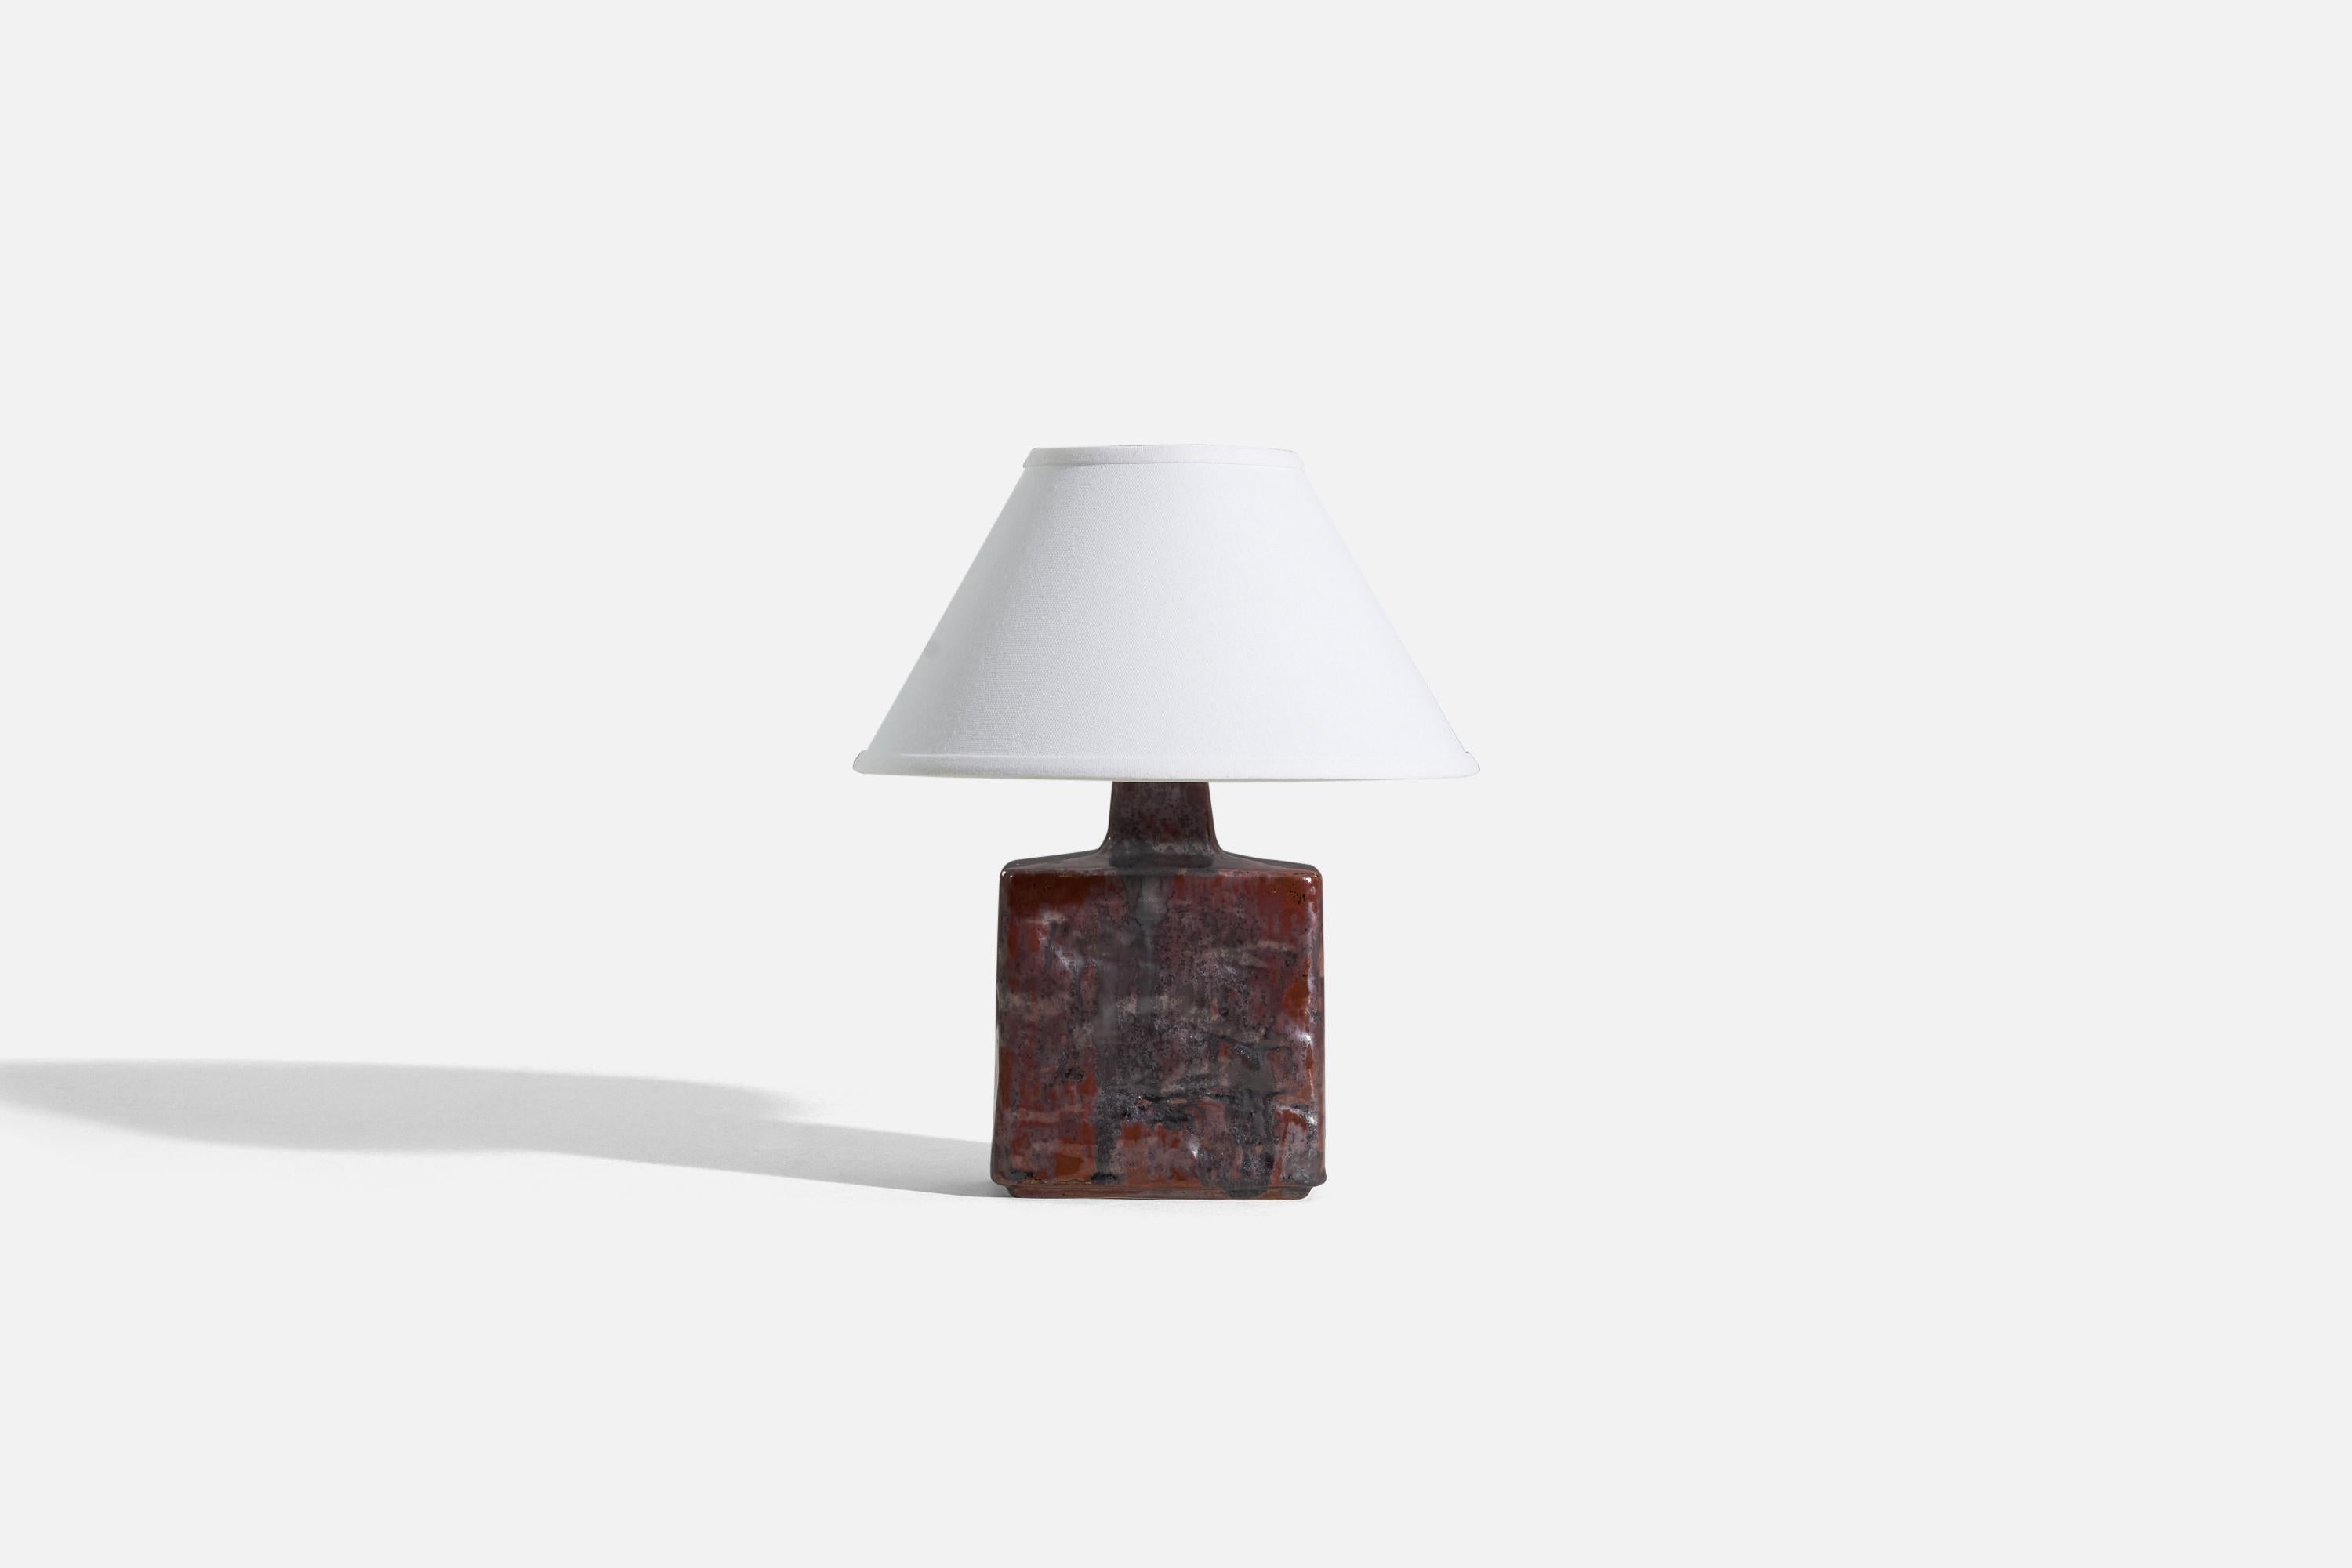 A red-glazed stoneware table lamp designed and produced by Desiree Stentøj, Denmark, c. 1960s. 

Sold without lampshade. 
Dimensions of Lamp (inches) : 11.375 x 6.25 x 3.25 (H x W x D)
Dimensions of Shade (inches) : 5 x 12.25 x 7.25 (T x B x